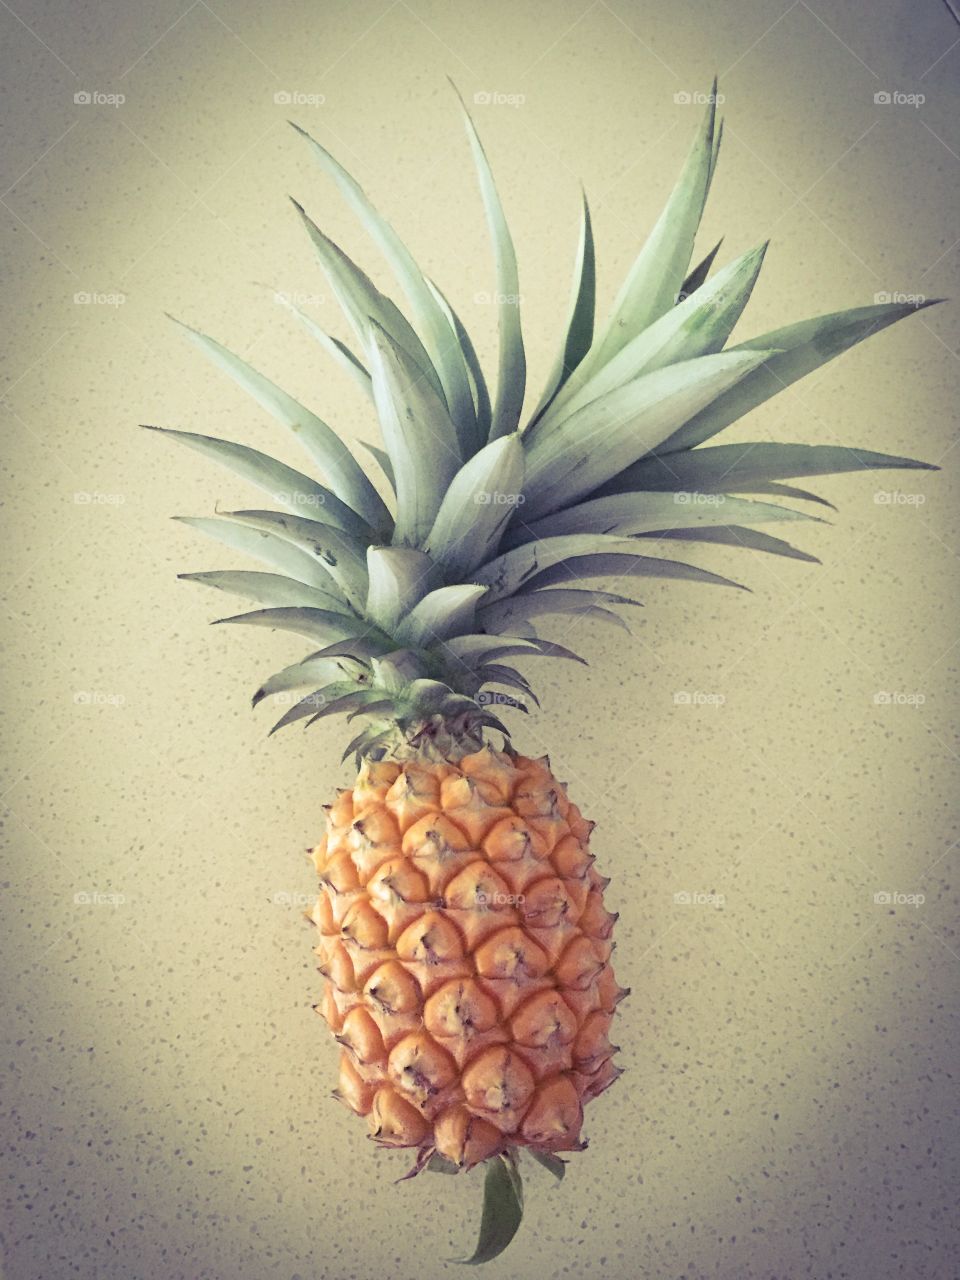 Pineapple . Our pineapple 